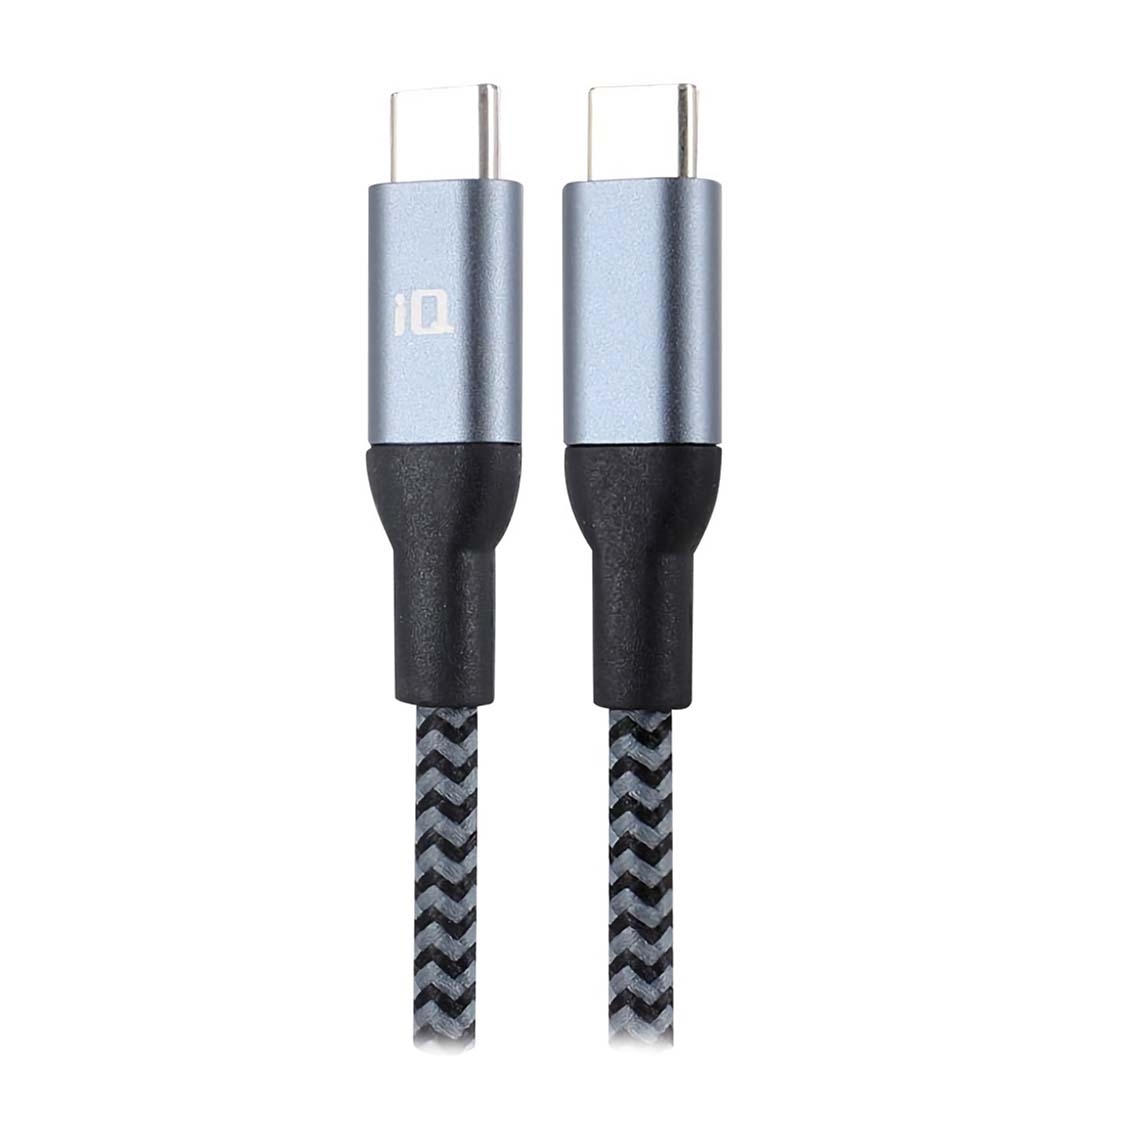 IQ USB Type-C to USB Type-C PD Cable (3 meters)